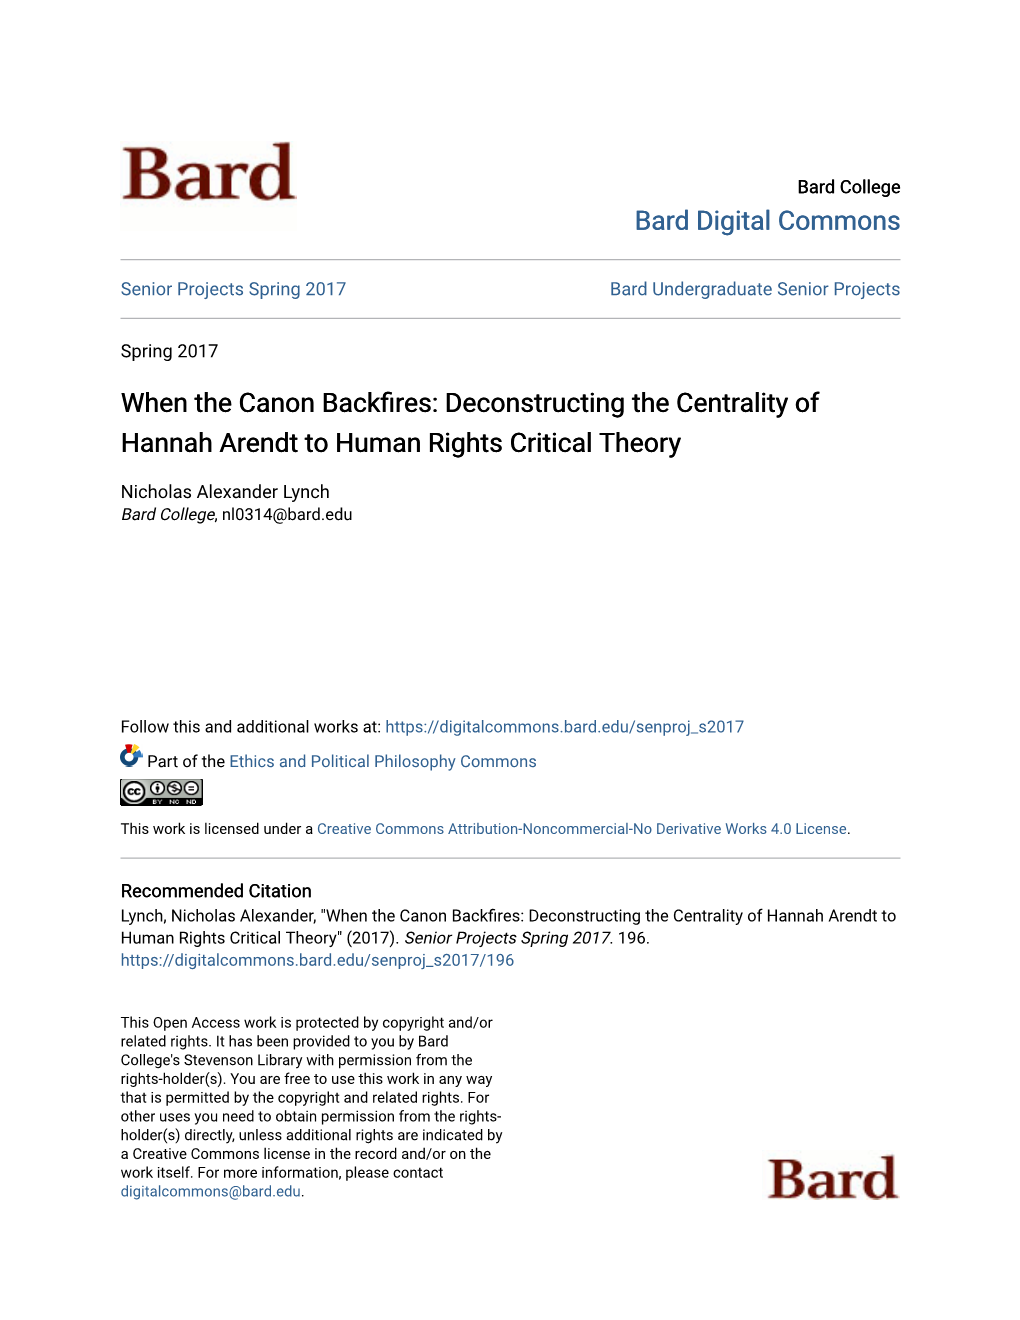 Deconstructing the Centrality of Hannah Arendt to Human Rights Critical Theory